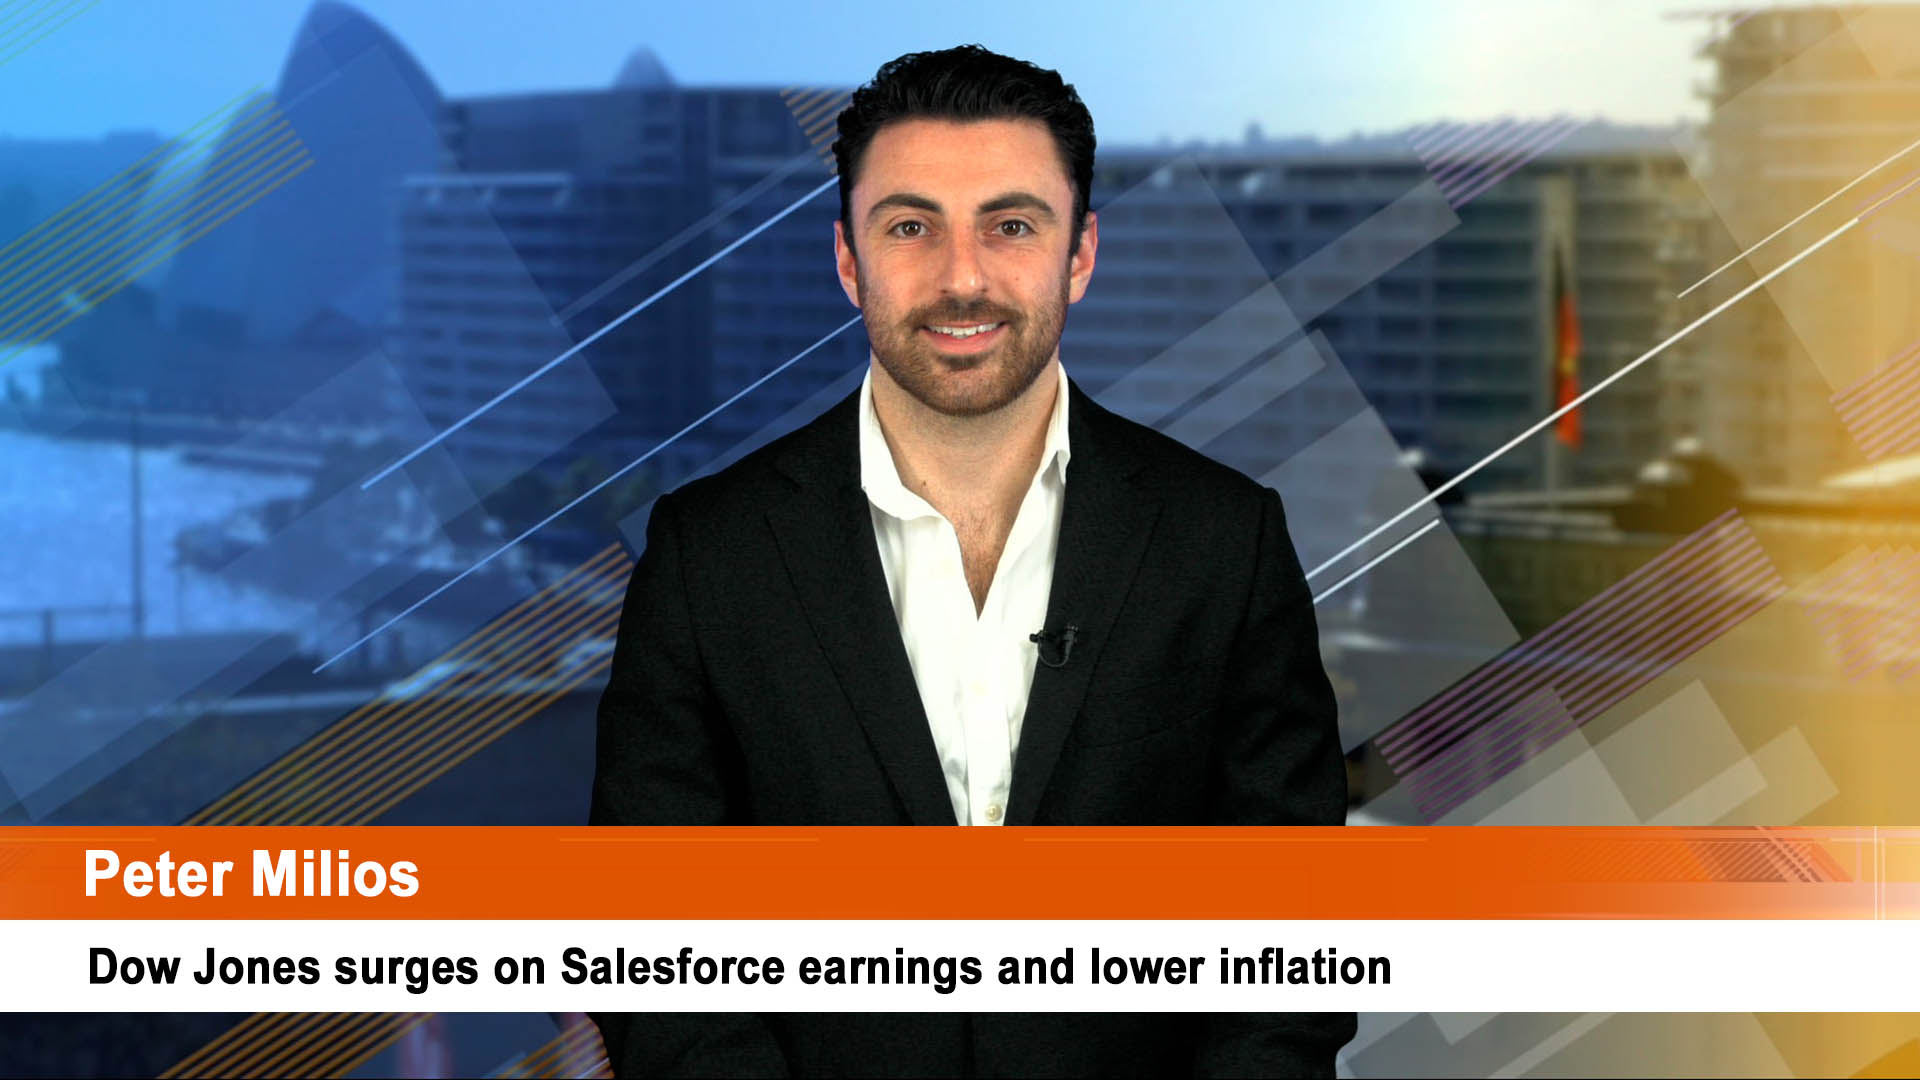 Dow Jones surges on Salesforce earnings and lower inflation